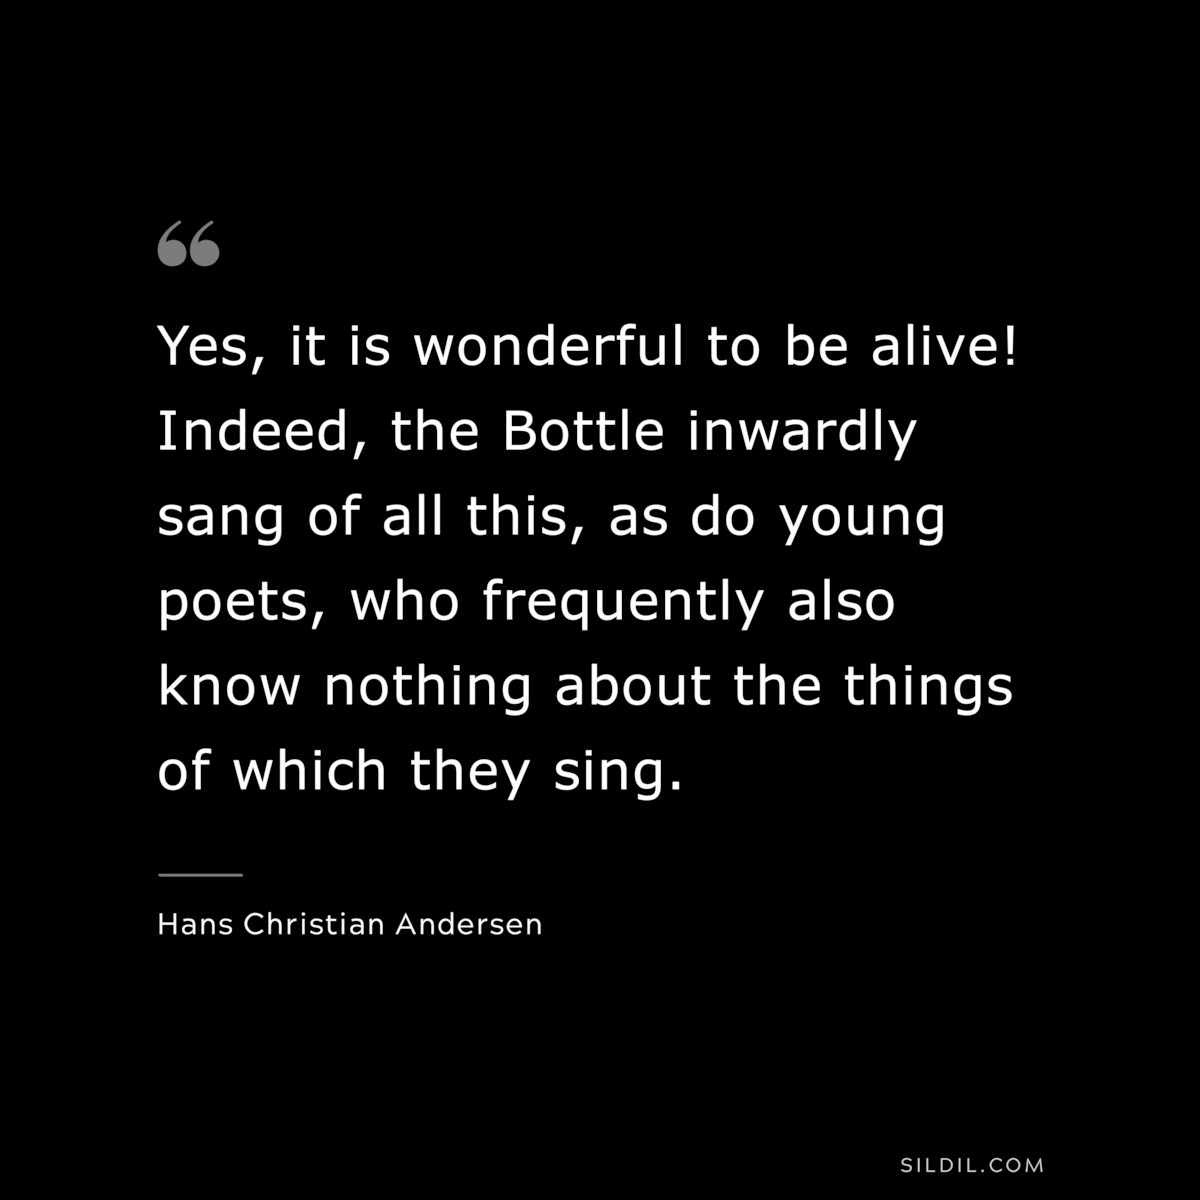 Yes, it is wonderful to be alive! Indeed, the Bottle inwardly sang of all this, as do young poets, who frequently also know nothing about the things of which they sing. ― Hans Christian Andersen